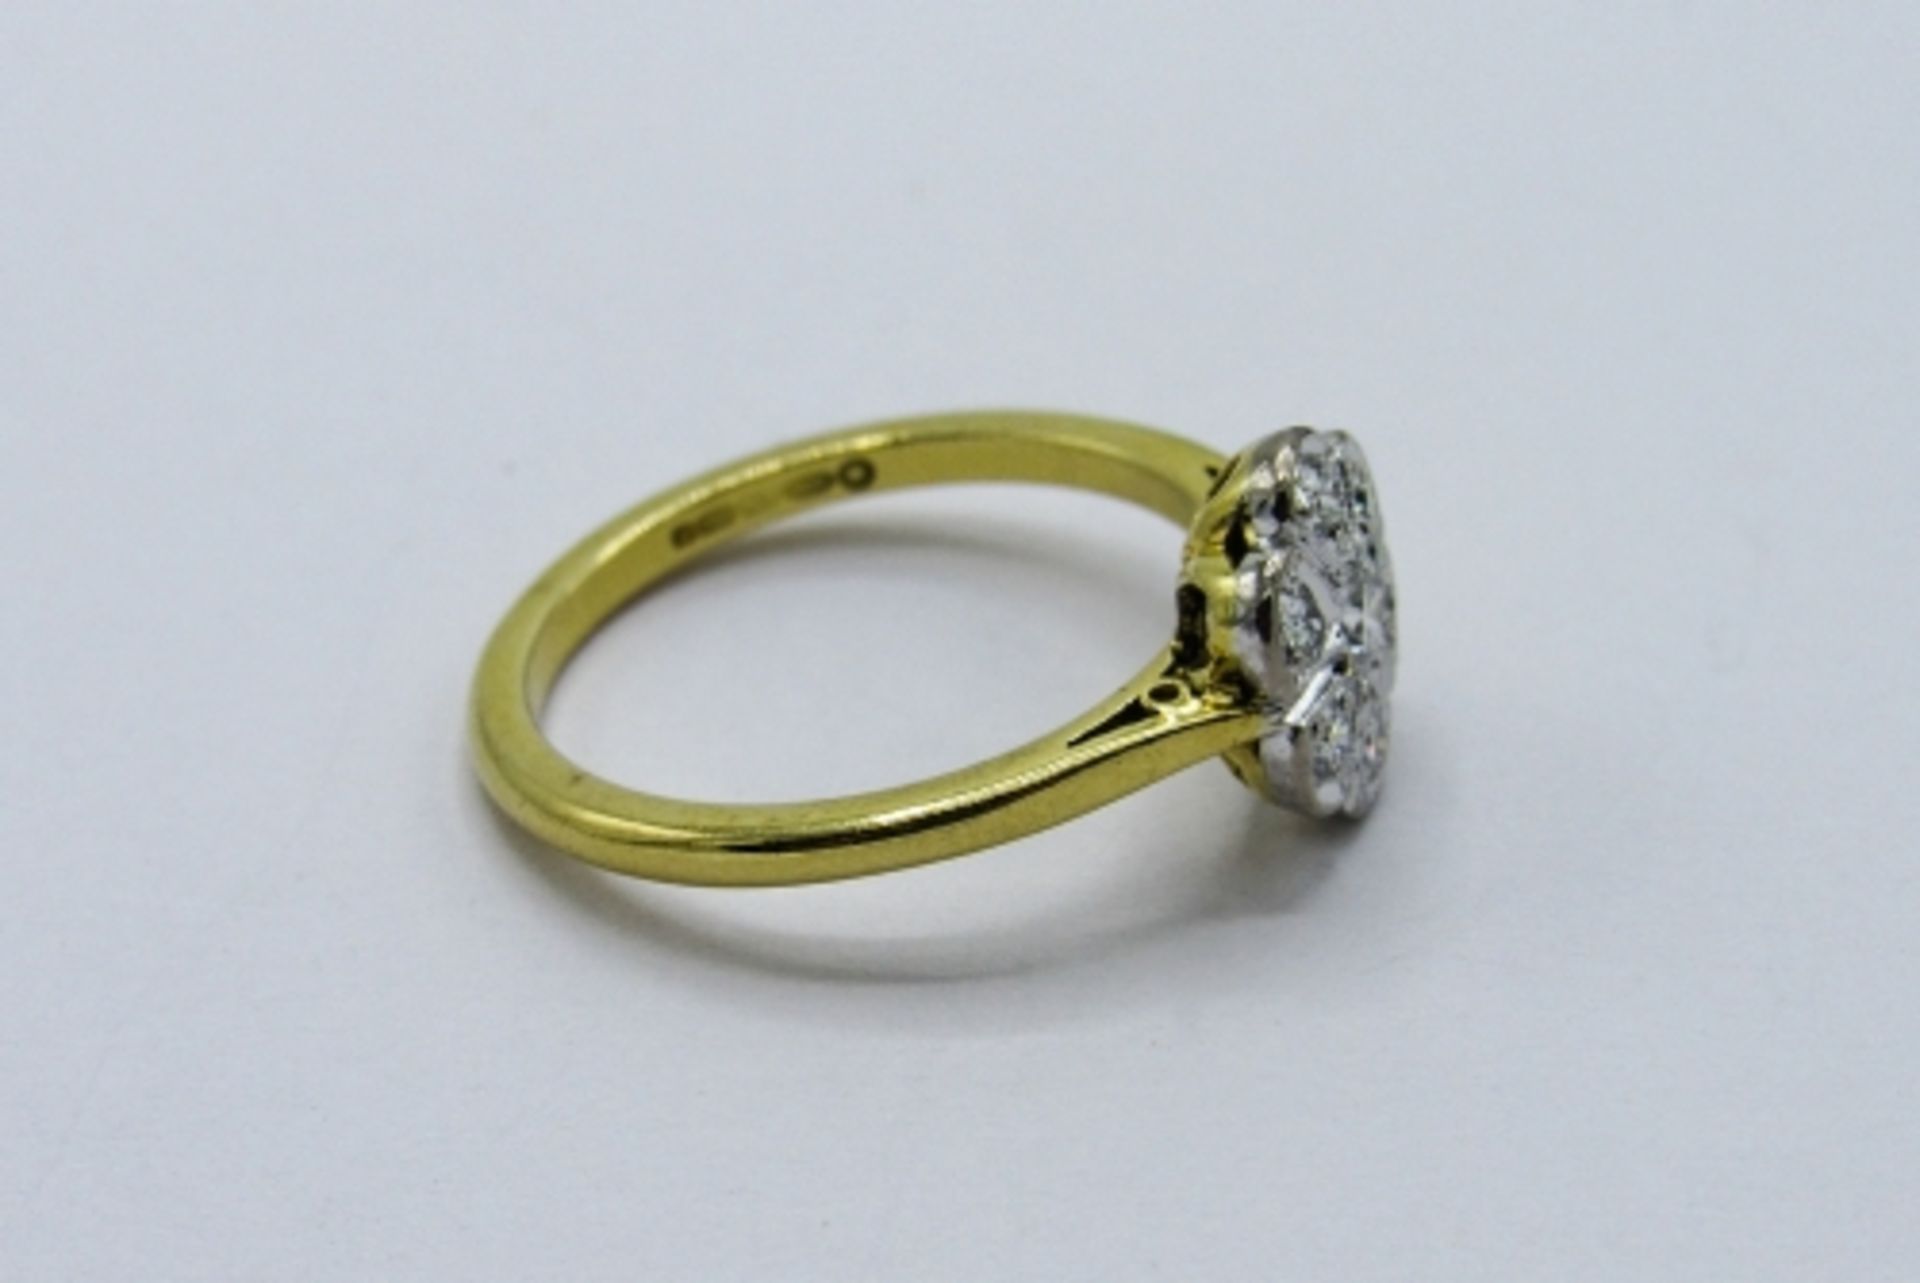 18ct gold floral set 7 diamond ring, weight 3.8gms, size O 1/2. Estimate £350-380 - Image 2 of 4